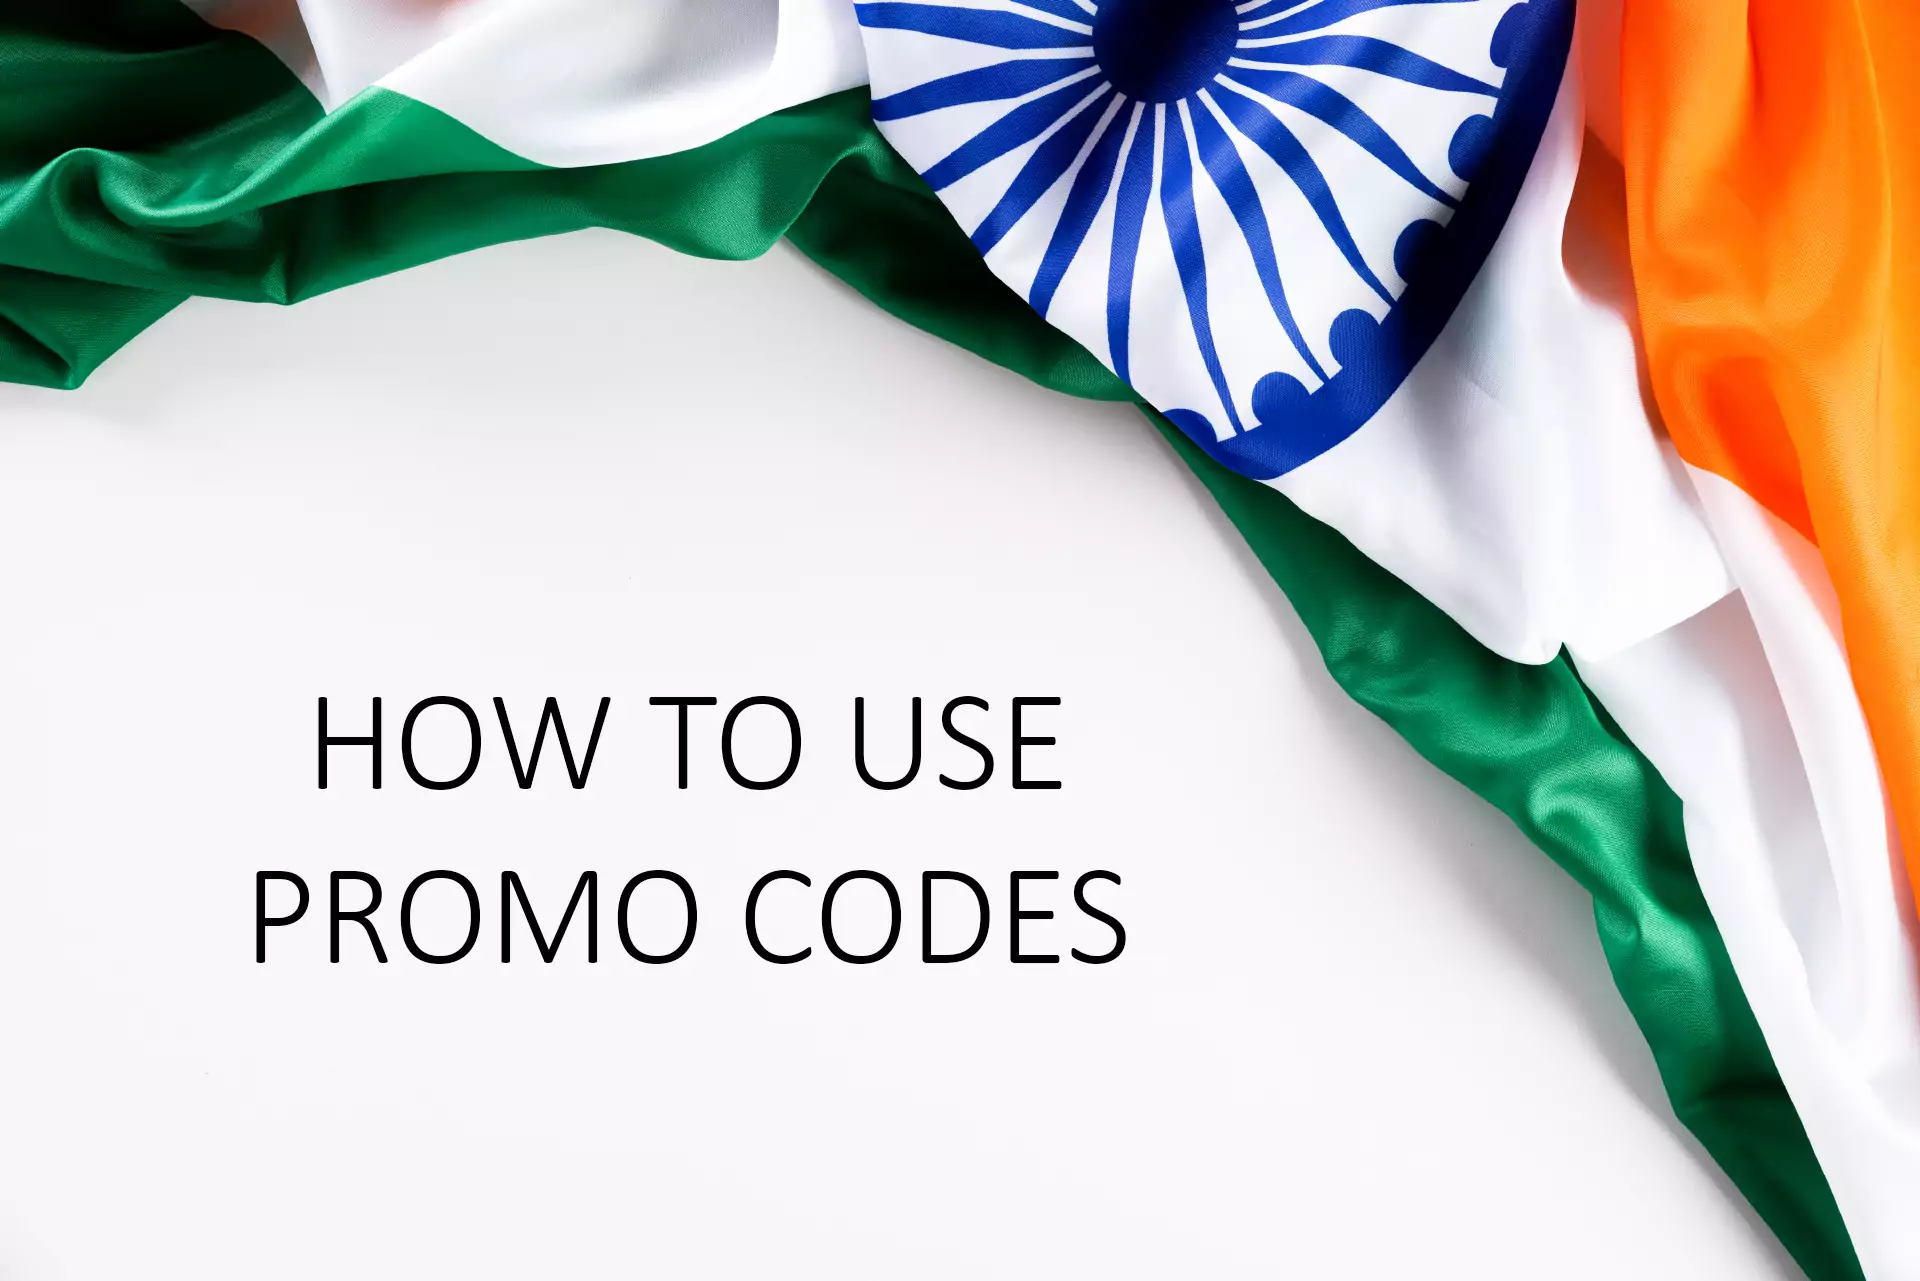 In order to use promo codes playing from India you need to choose the site and register.